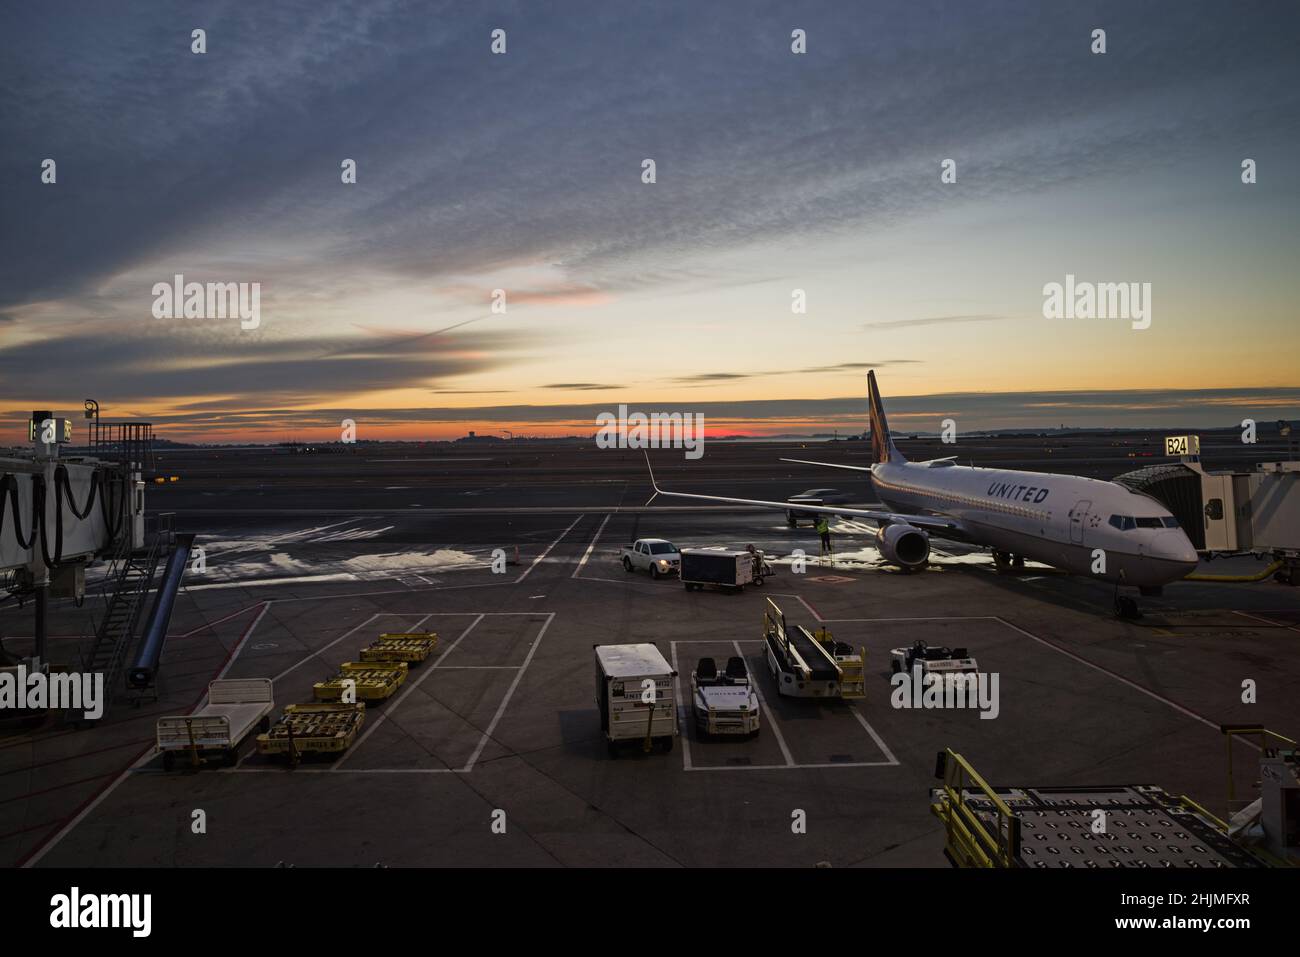 early morning view of United Airplane at BOS boston Logan Airport on a cold winter day Stock Photo